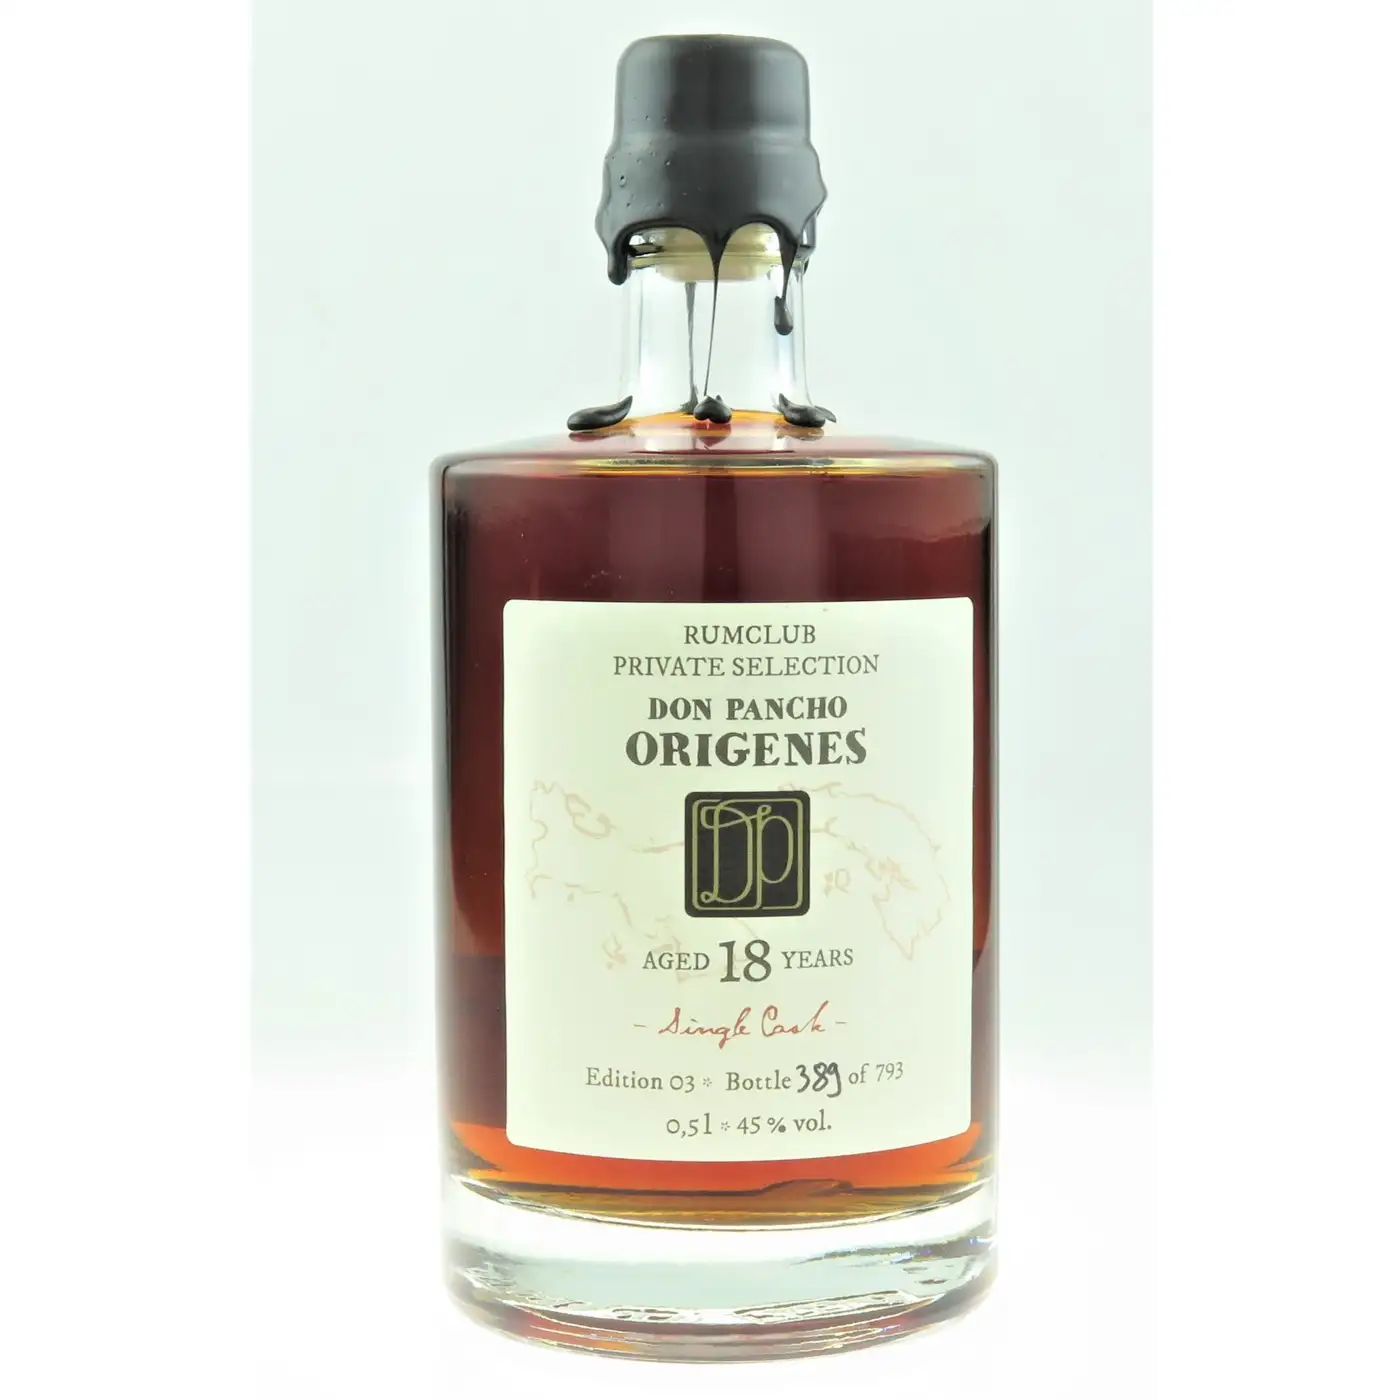 Image of the front of the bottle of the rum Rumclub Private Selection Ed. 03 Don Pancho Origenes